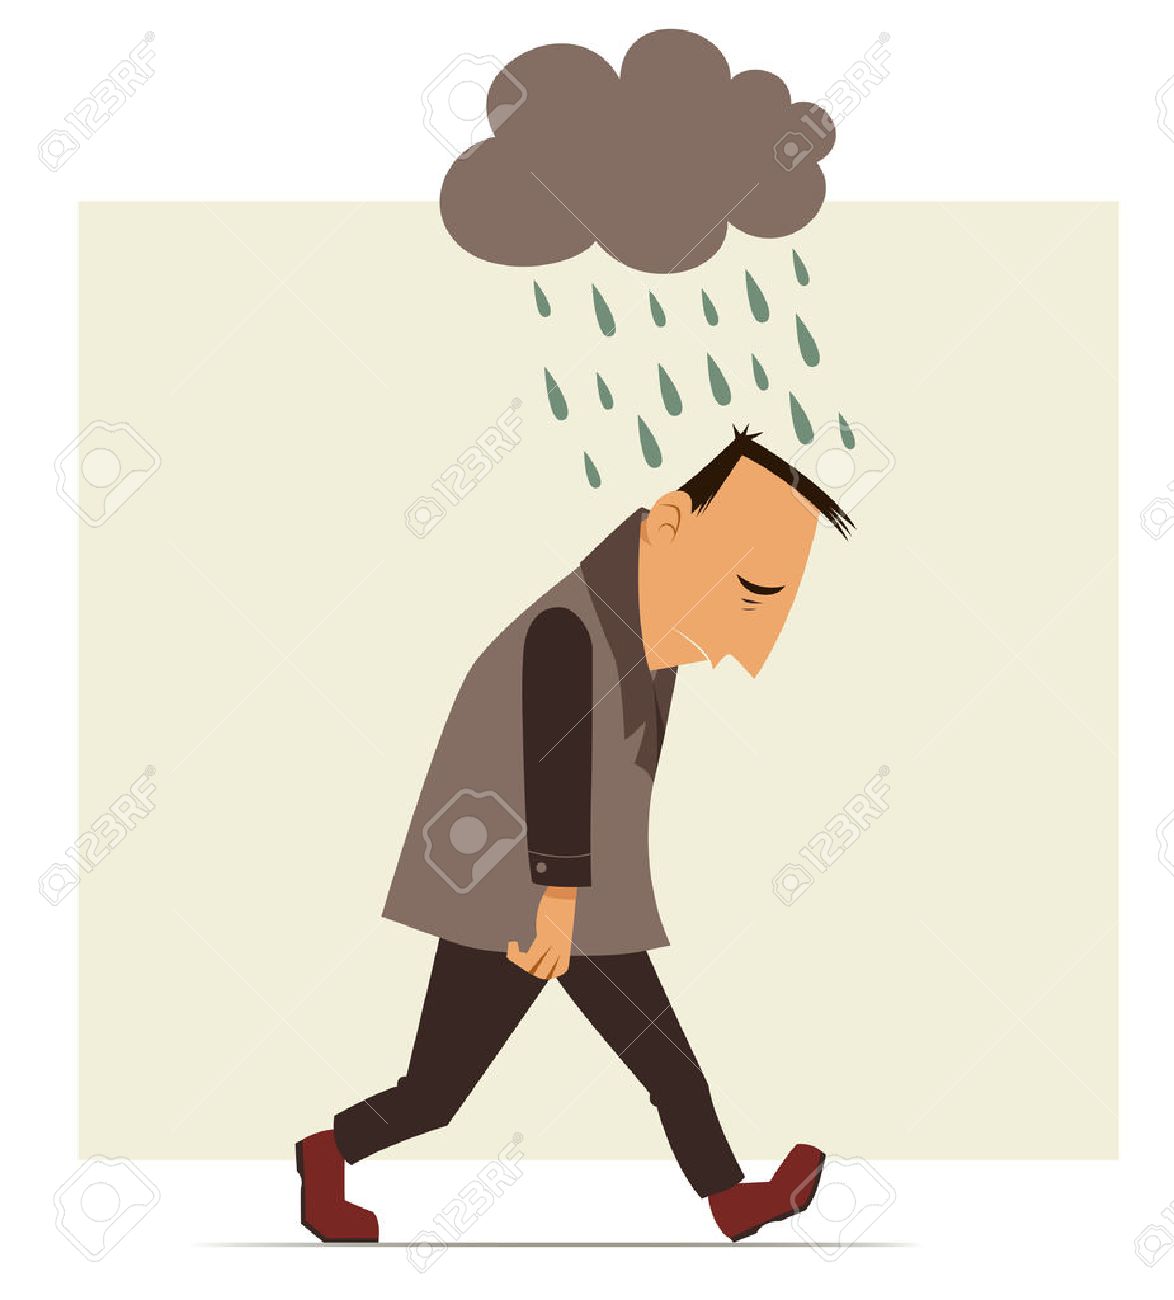 27291105-depressed-man-walking-with-a-cloud-of-rain-over-his-head.jpg